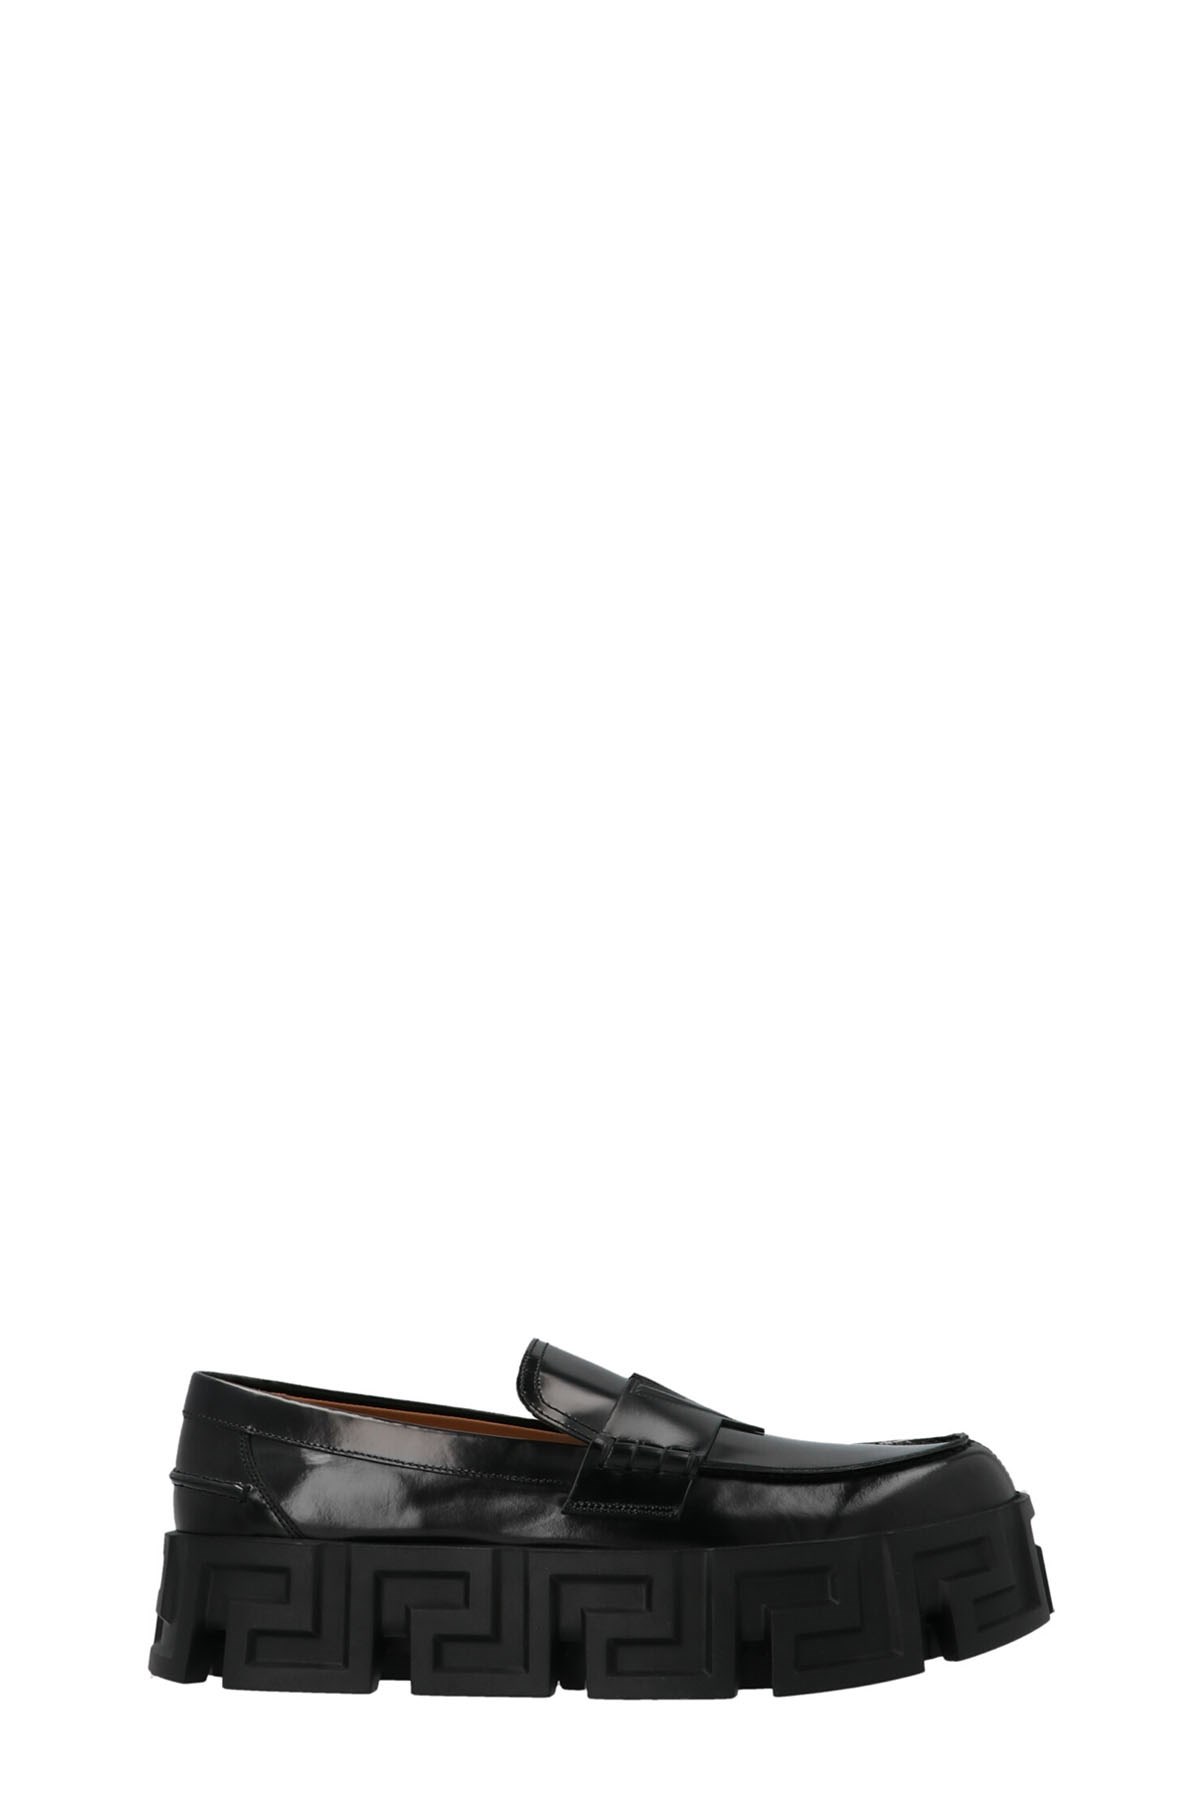 VERSACE 'Oversize Sole’ Loafers